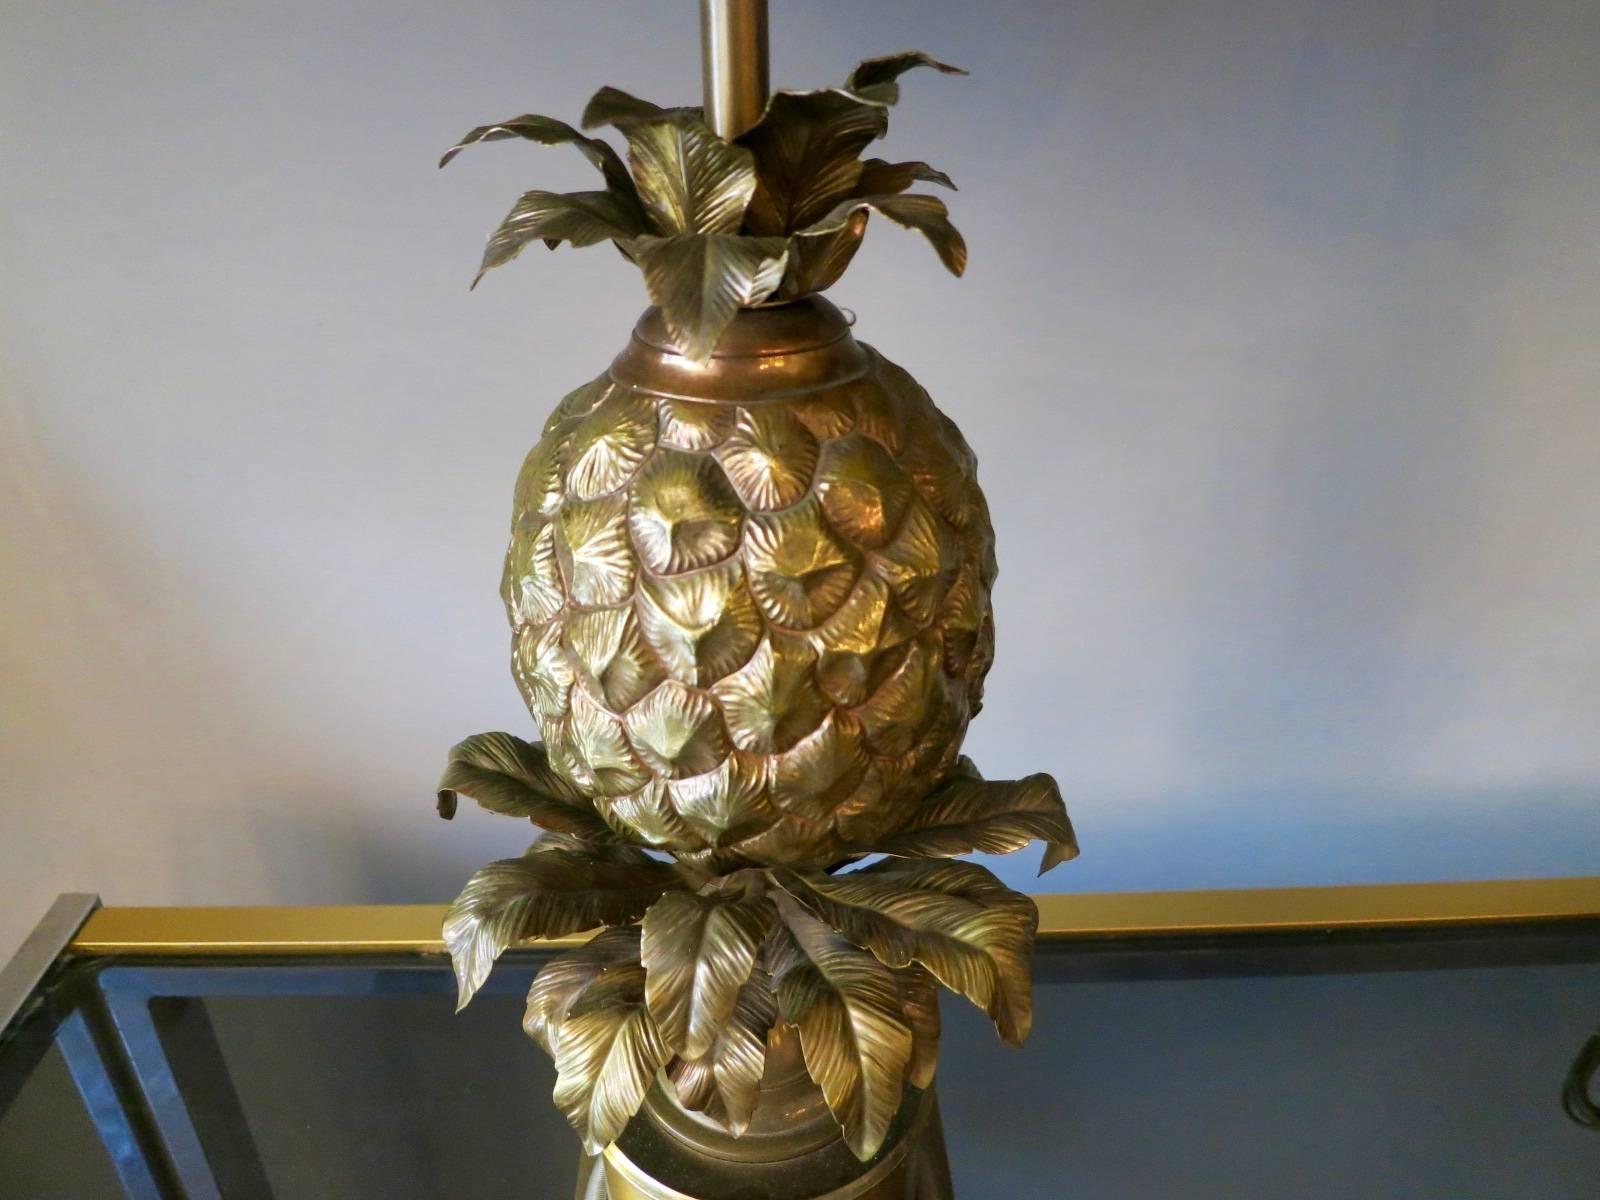 A very fine pair of patinated bronze and bronze pineapple lamps with original bronze shades. Signed Charles and in excellent condition, late 20th century.